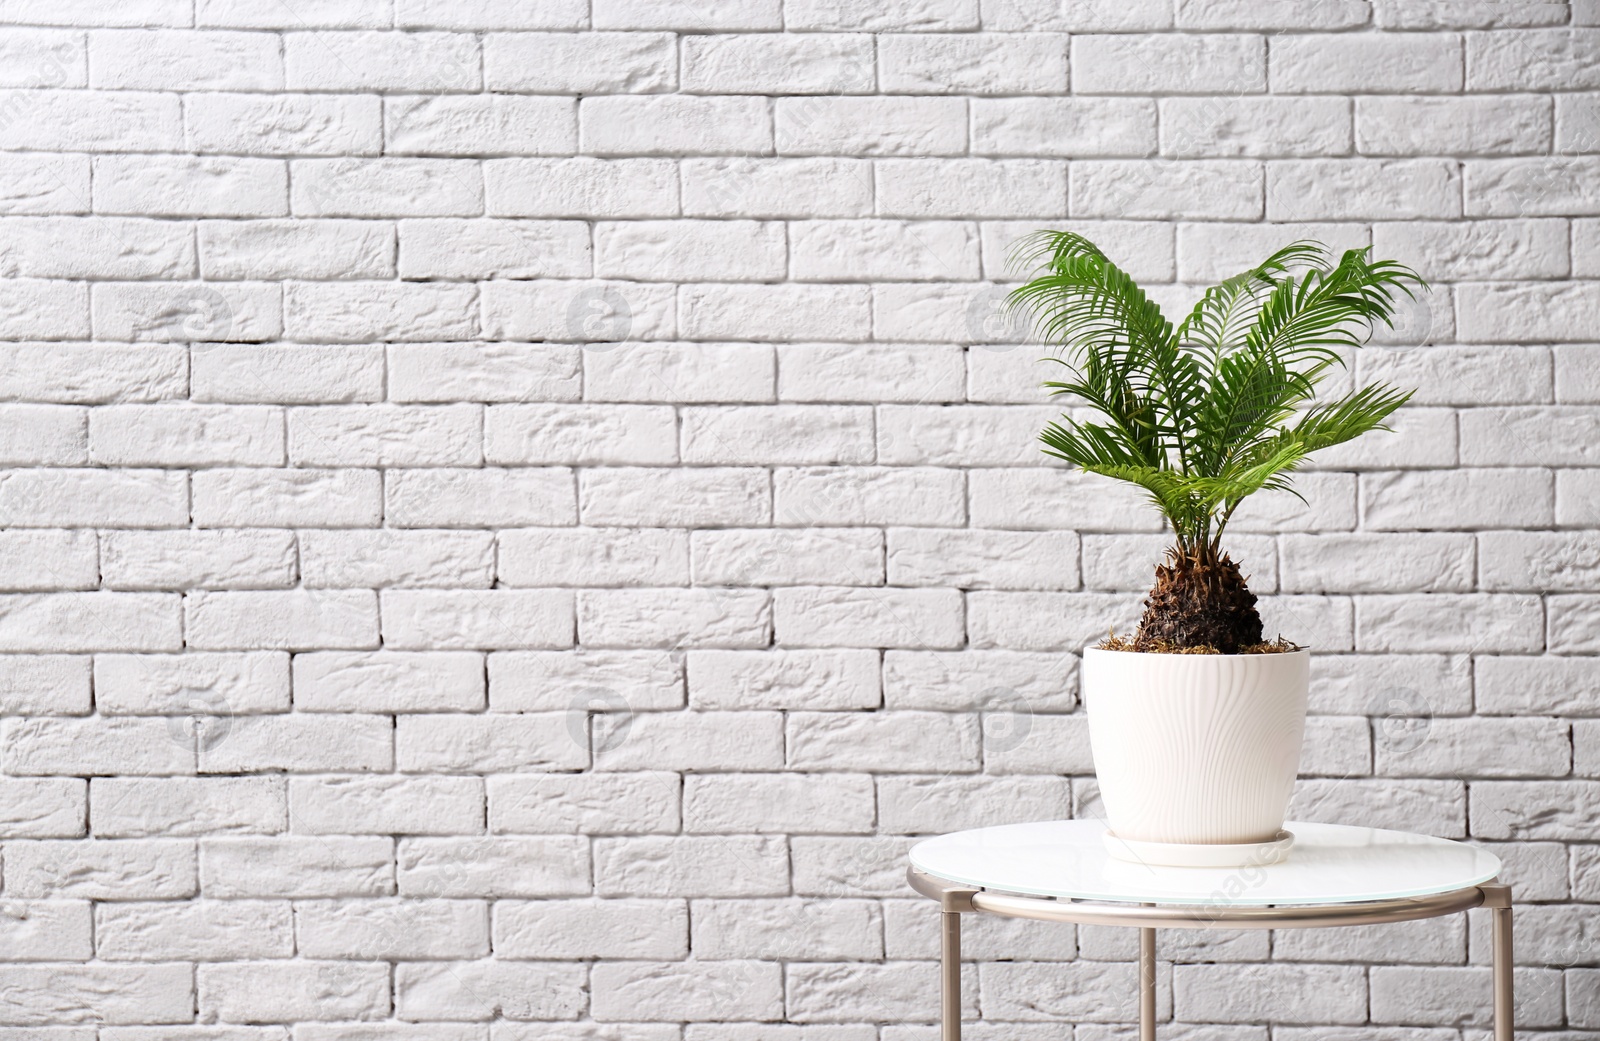 Photo of Tropical plant with green leaves on table near brick wall